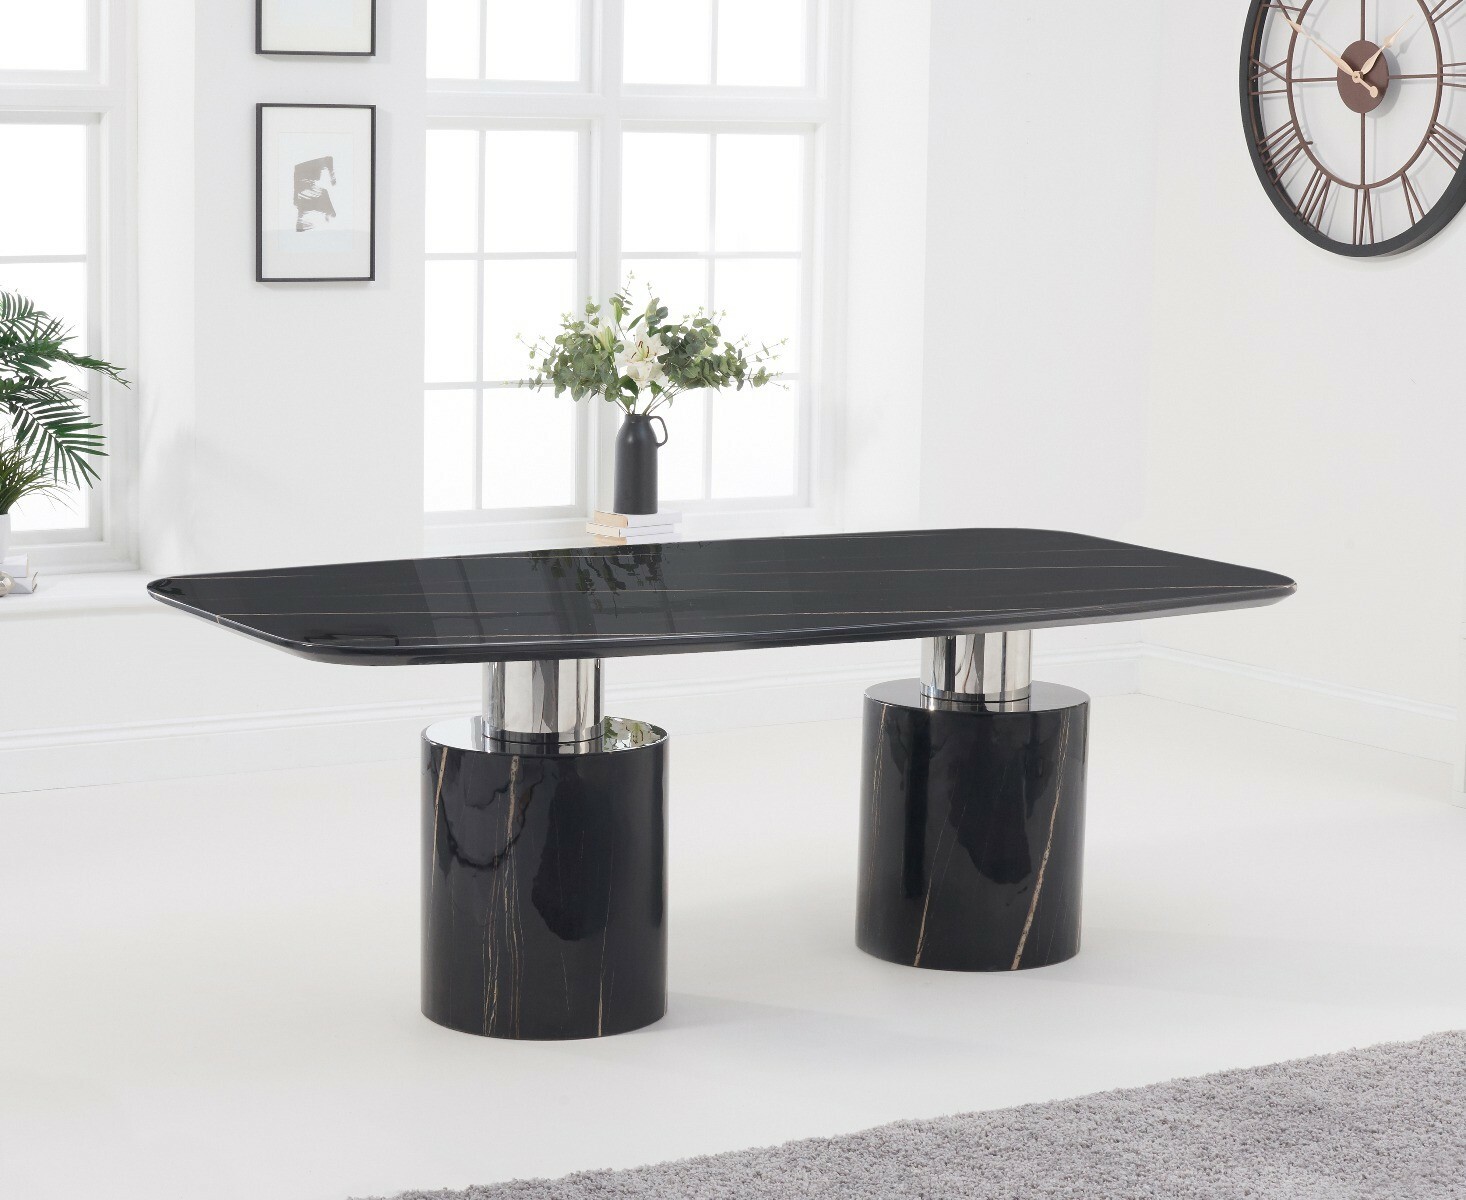 Photo 2 of Antonio 180cm black marble dining table with 4 cream francesca chairs